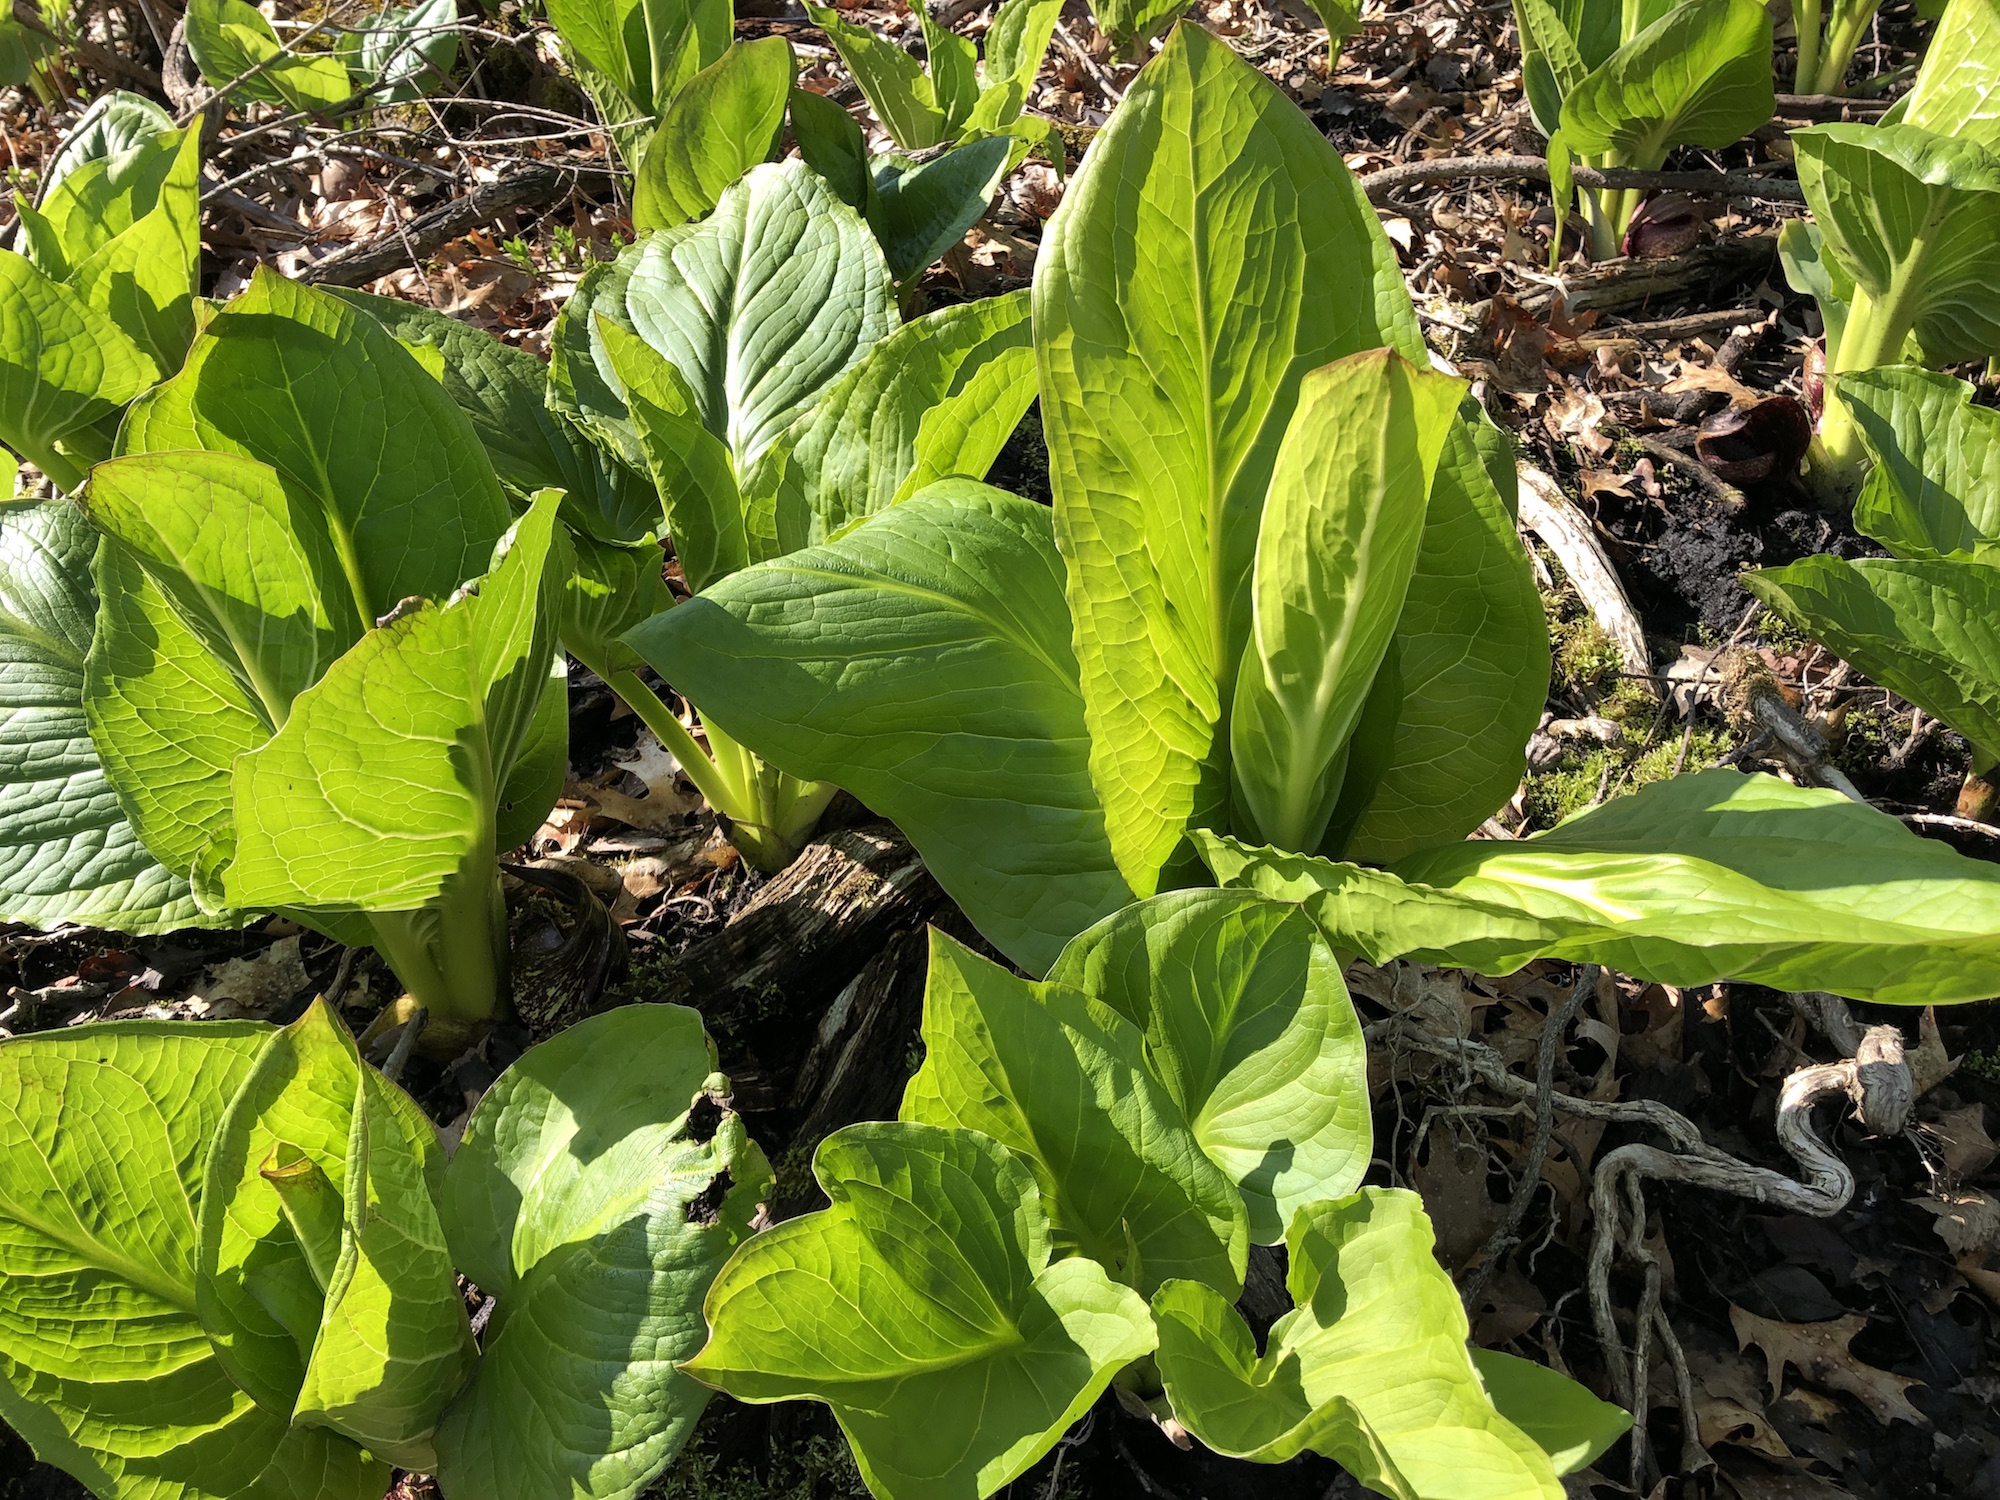 Skunk Cabbage after the flowers have bloomed in UW-Madison Arboretum on May 4, 2019.